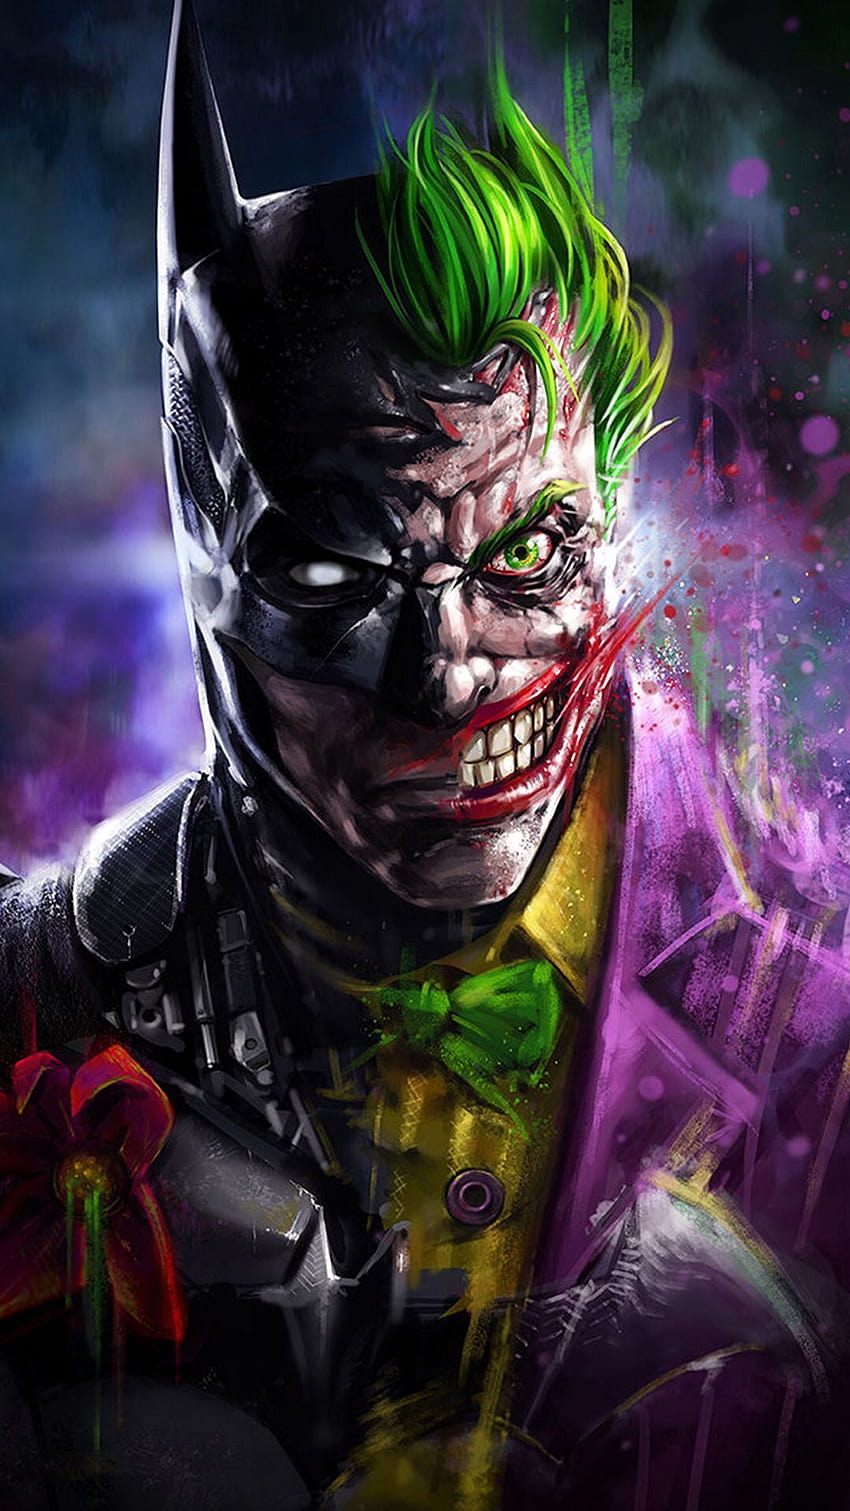 Joker Awesome Two Faces With Batman Merge Together, 배트맨 얼굴 HD 전화 배경 화면